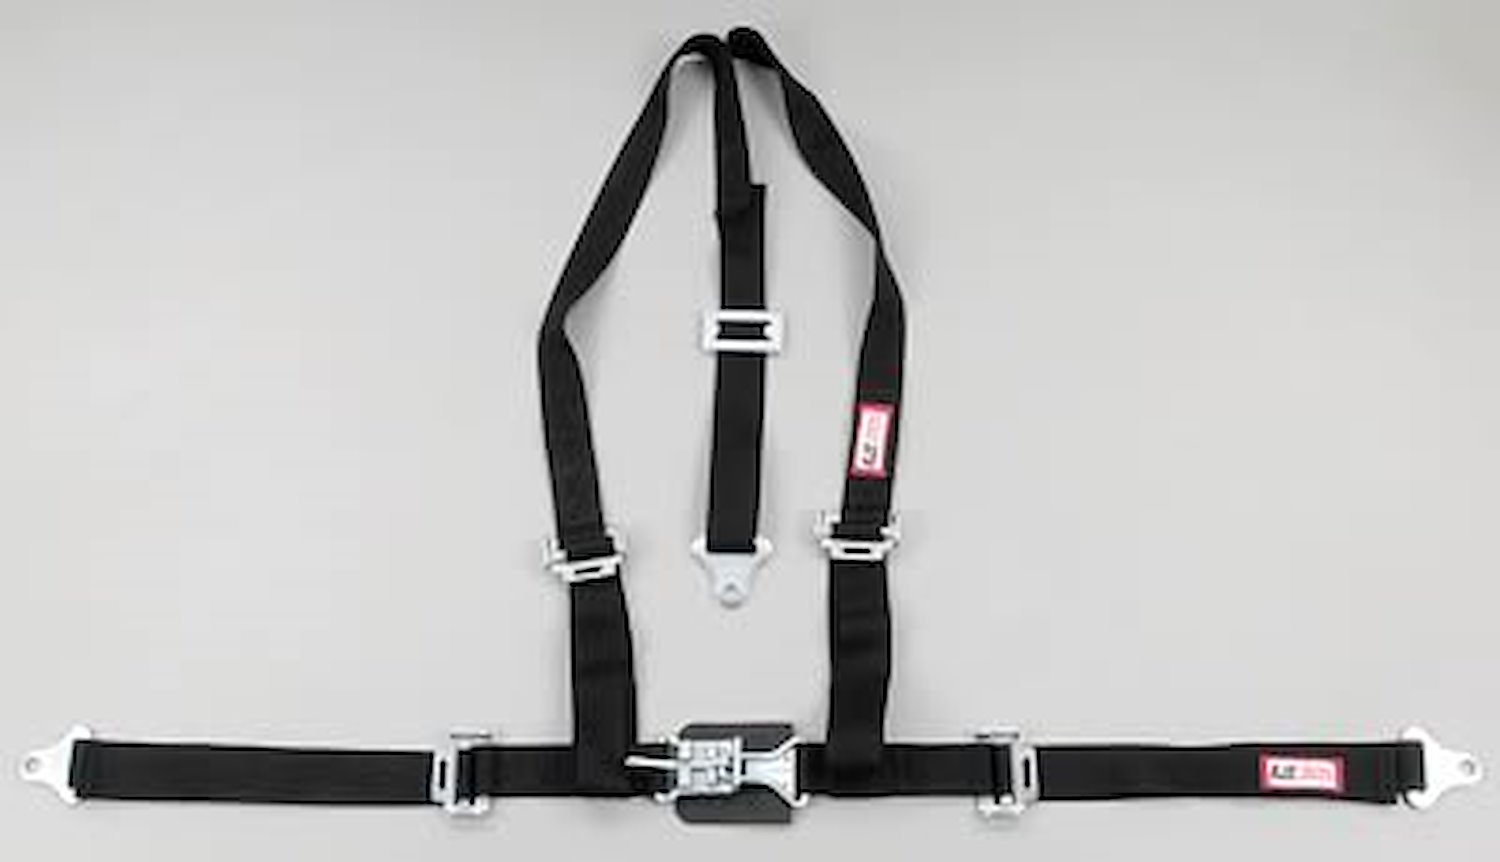 NON-SFI L&L HARNESS 3 PULL UP Lap Belt w/adjuster 2 S.H. V ROLL BAR Mount ALL WRAP ENDS PURPLE